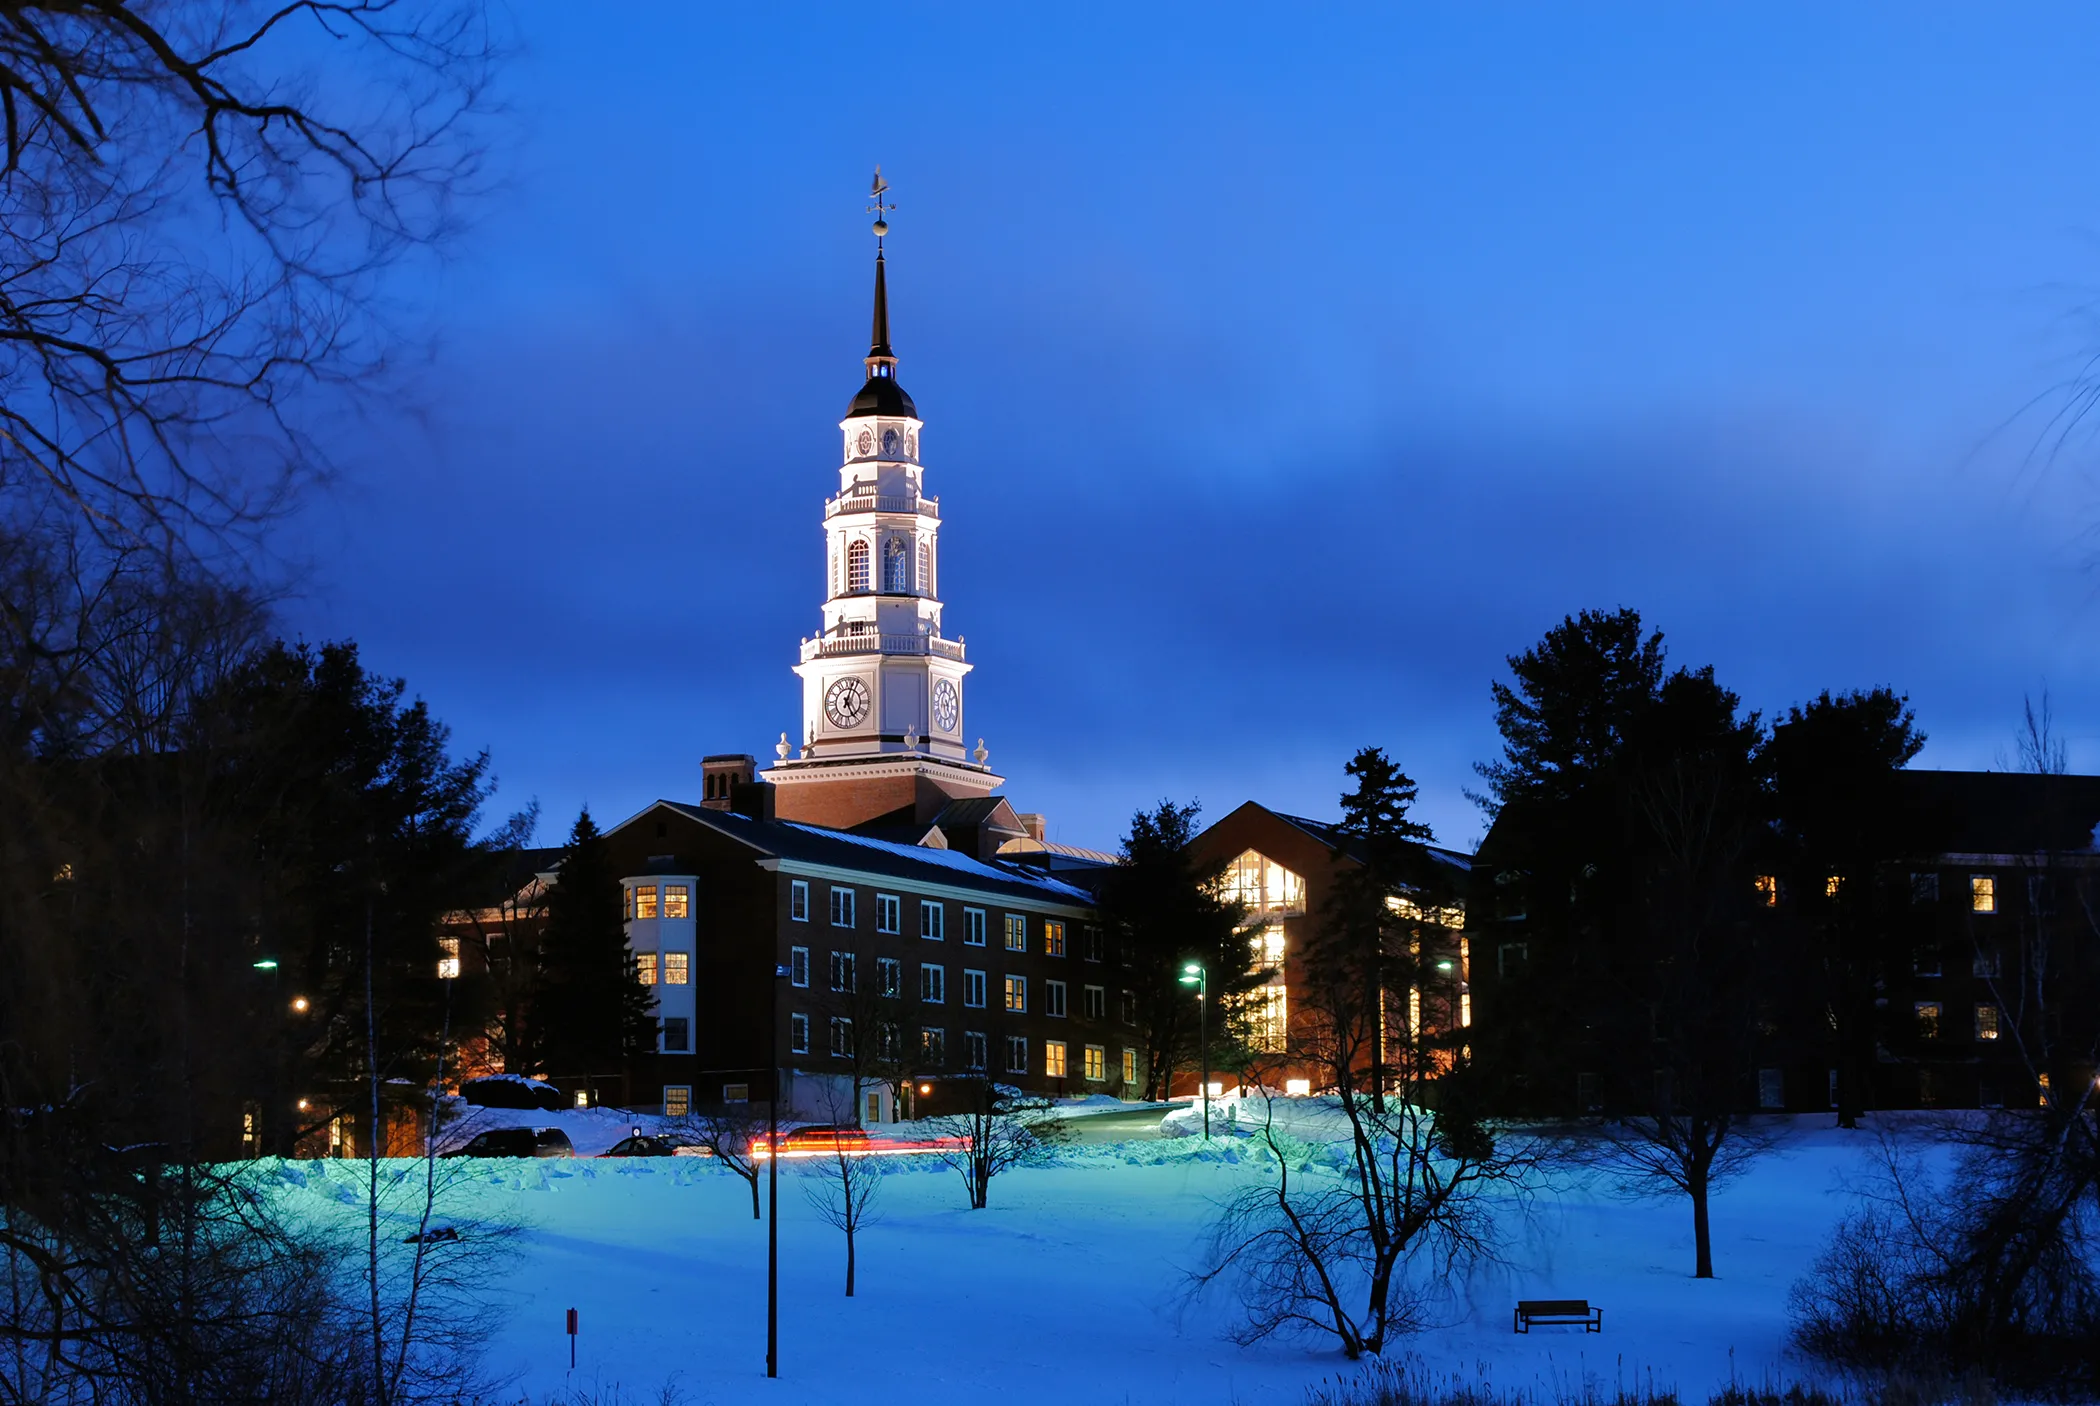 5. Colby College Money